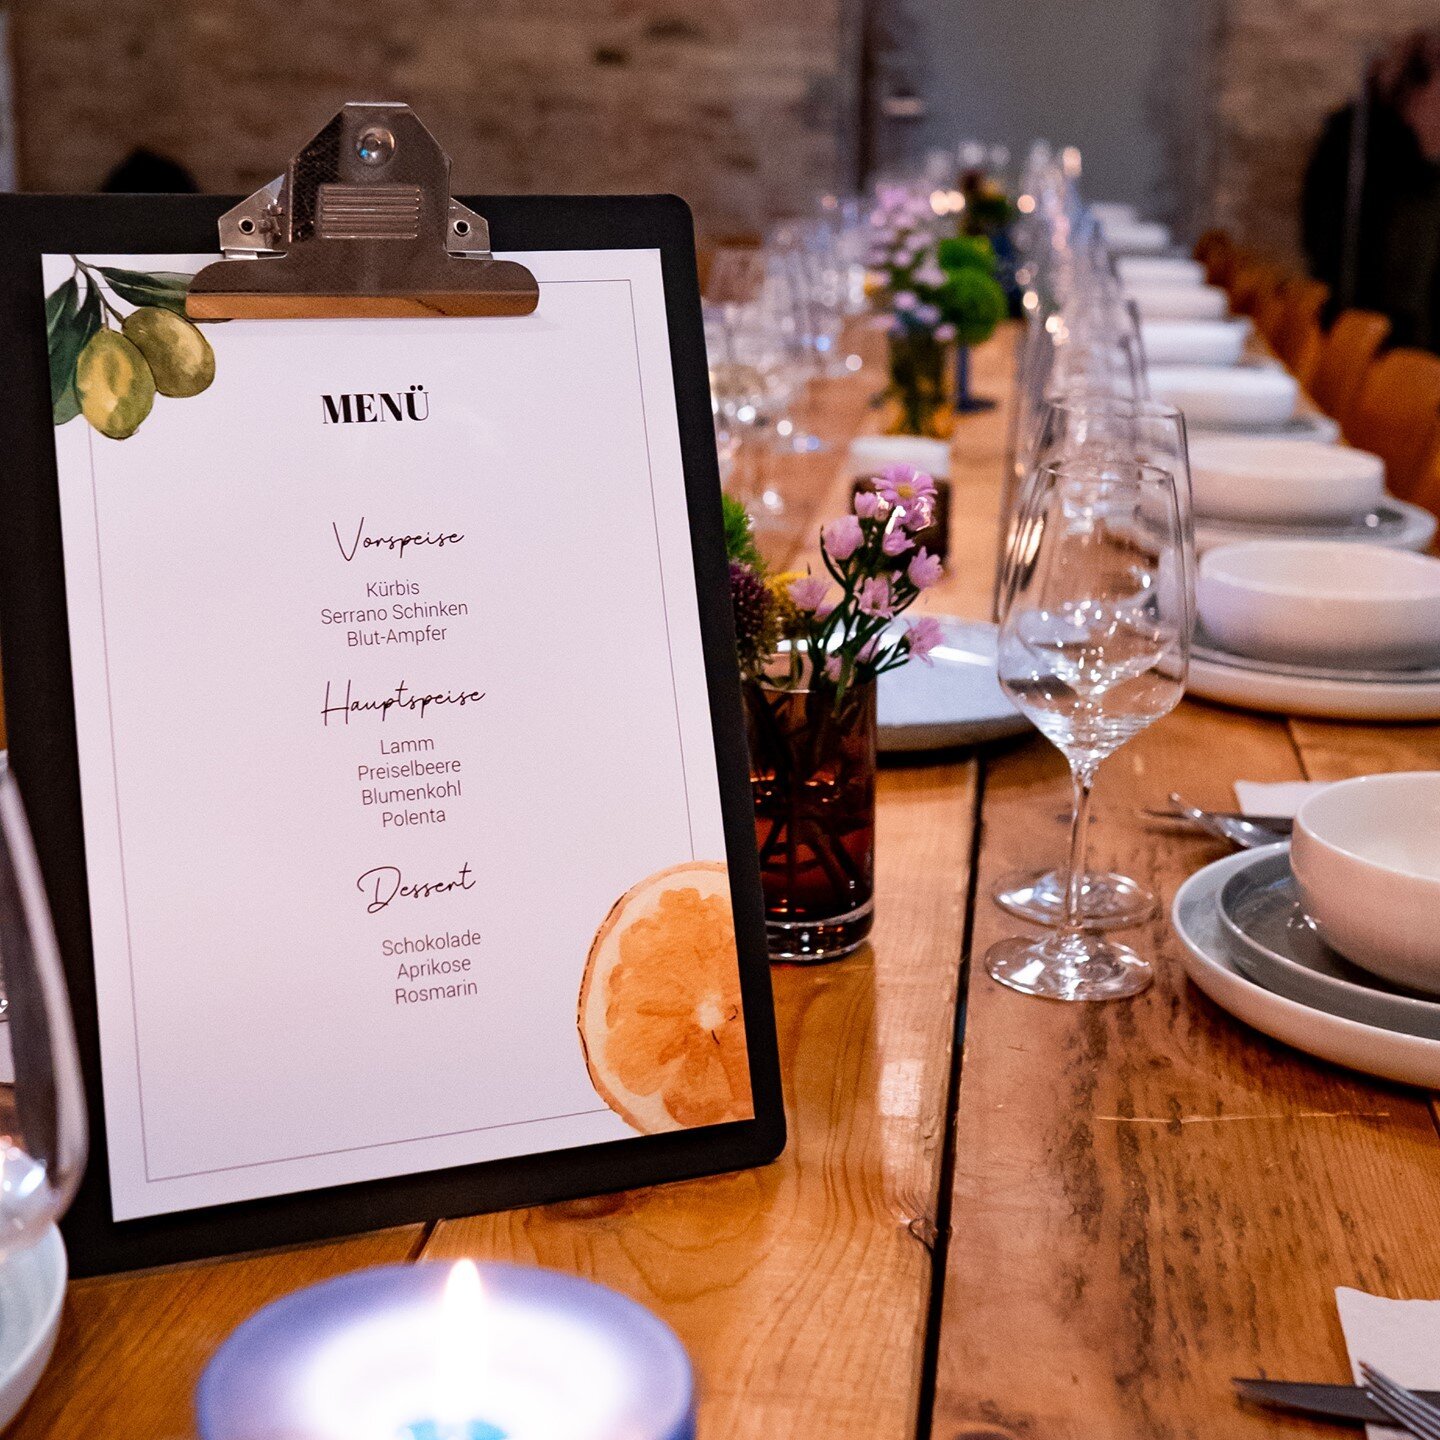 Family Style Custom Menu. Hungry yet? 🍴

#supperclub #businessevent #b2b #food #foodlover #chef #foodbringspeopletogether #chefsofinstagram #custommenu #workexperience #marketinglead #eventmanagement #uniquecombination #tablescape #tablesetting #ins